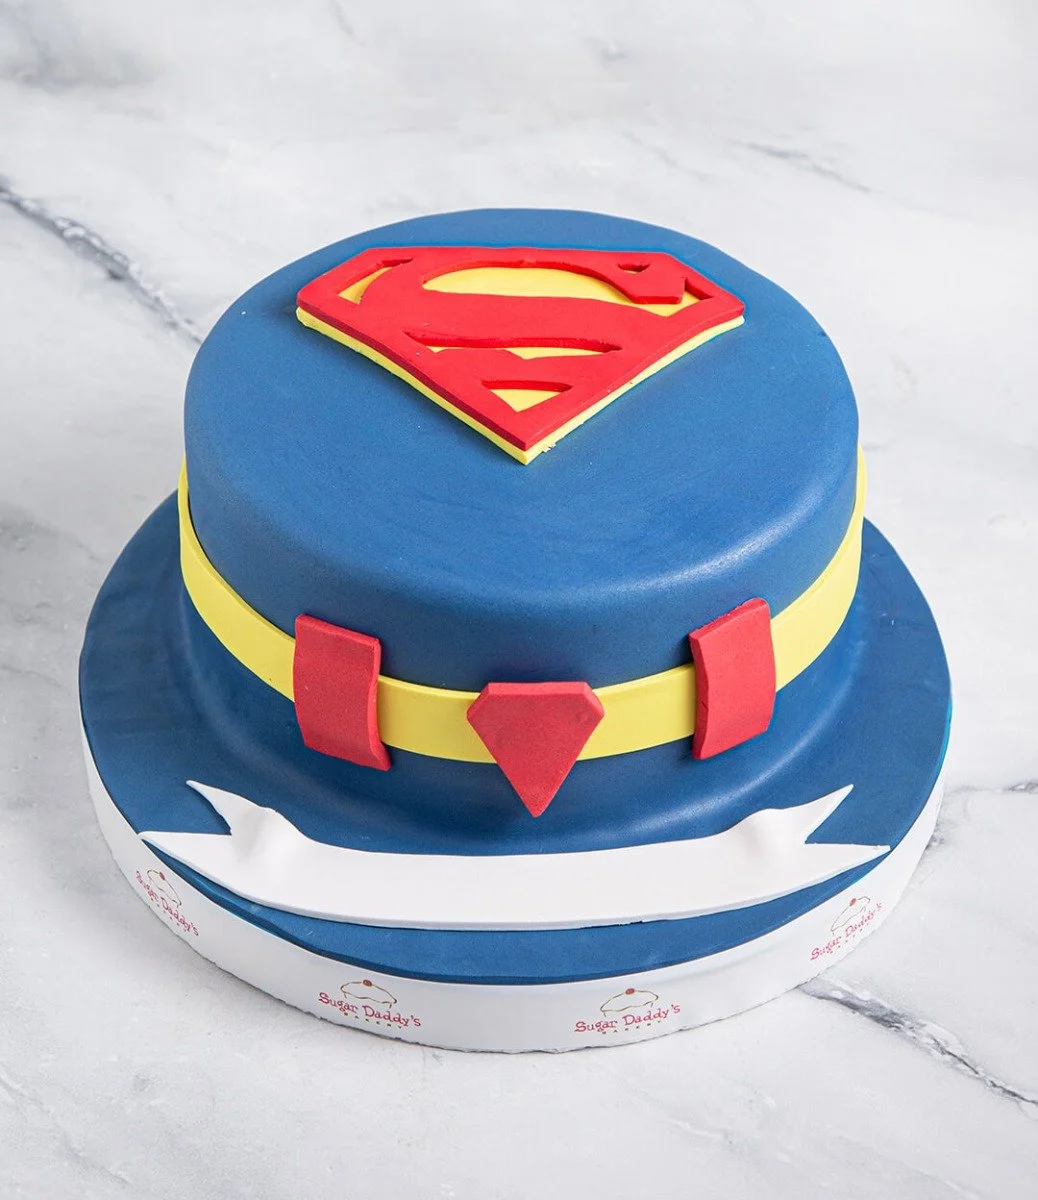 Superman Design Cake By Sugar Daddy's Bakery 